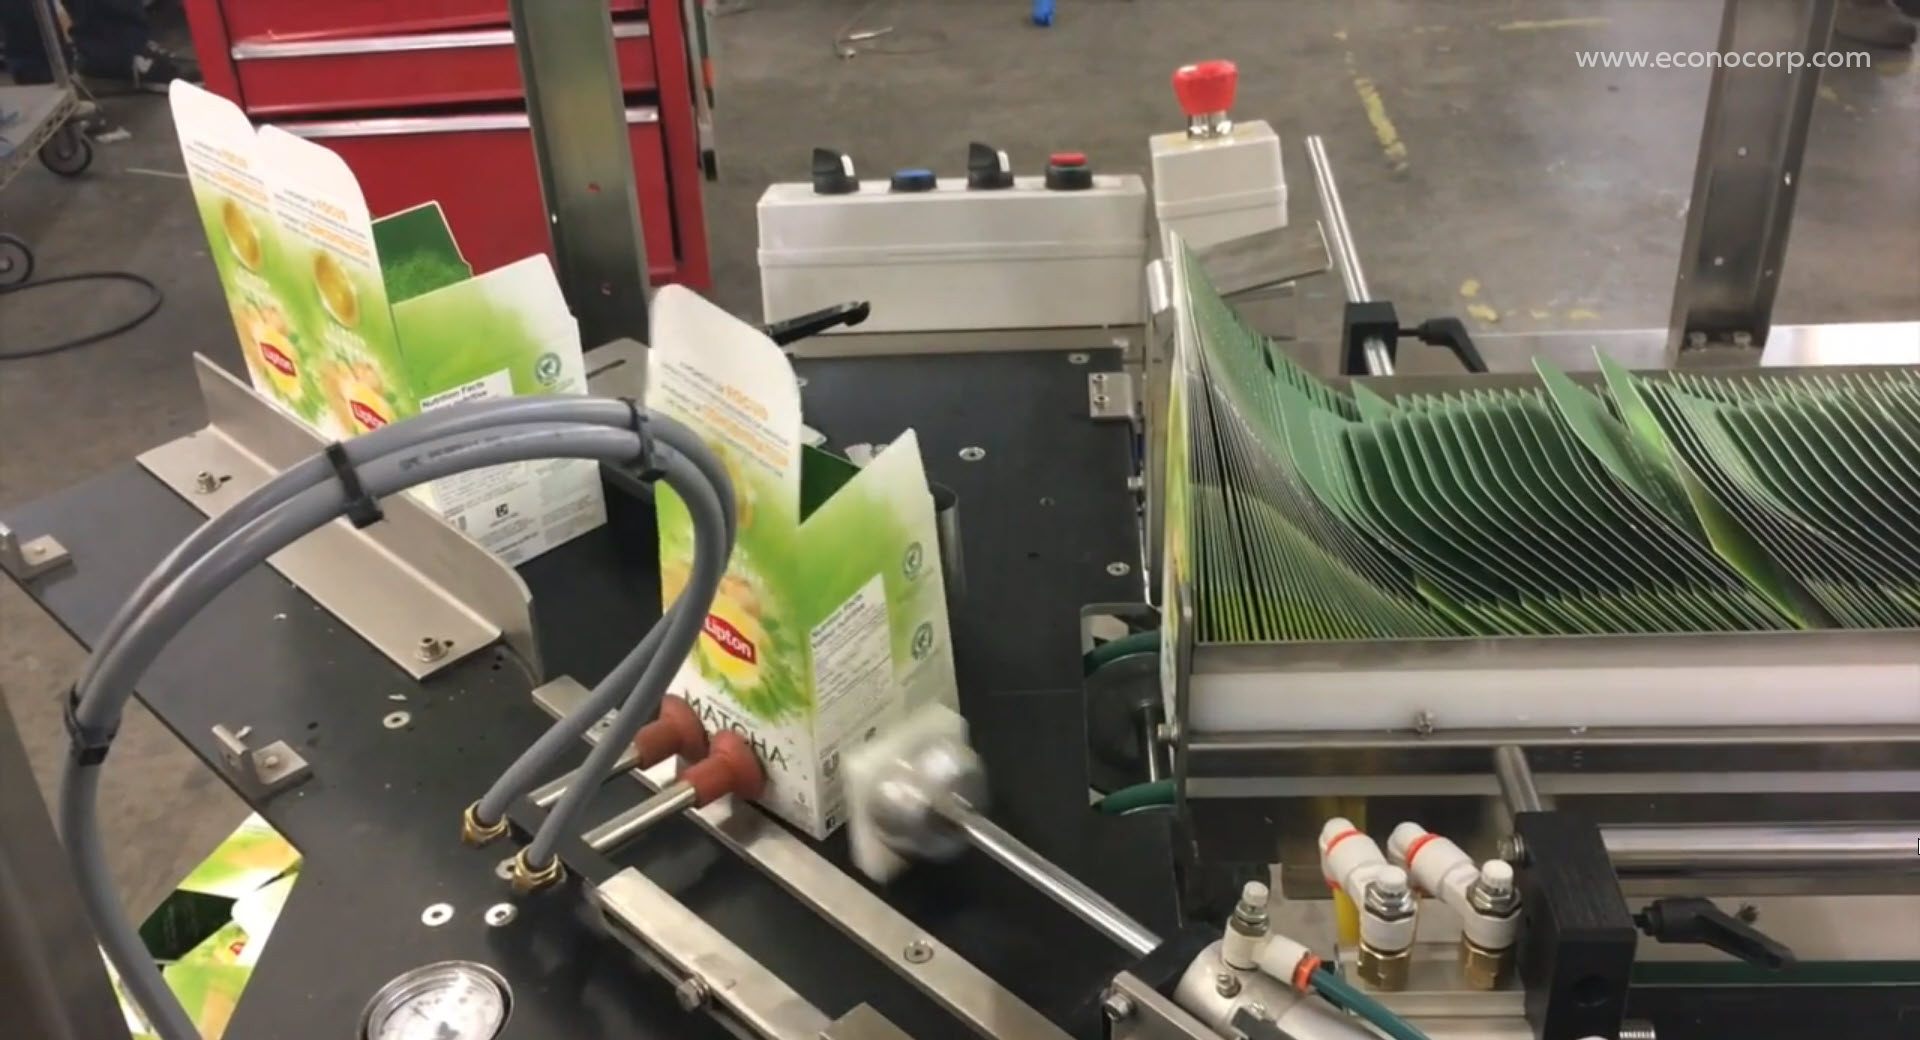 Auto bottom erector machine gathering and opening boxes from a supply magazine via a rotary vacuum system.